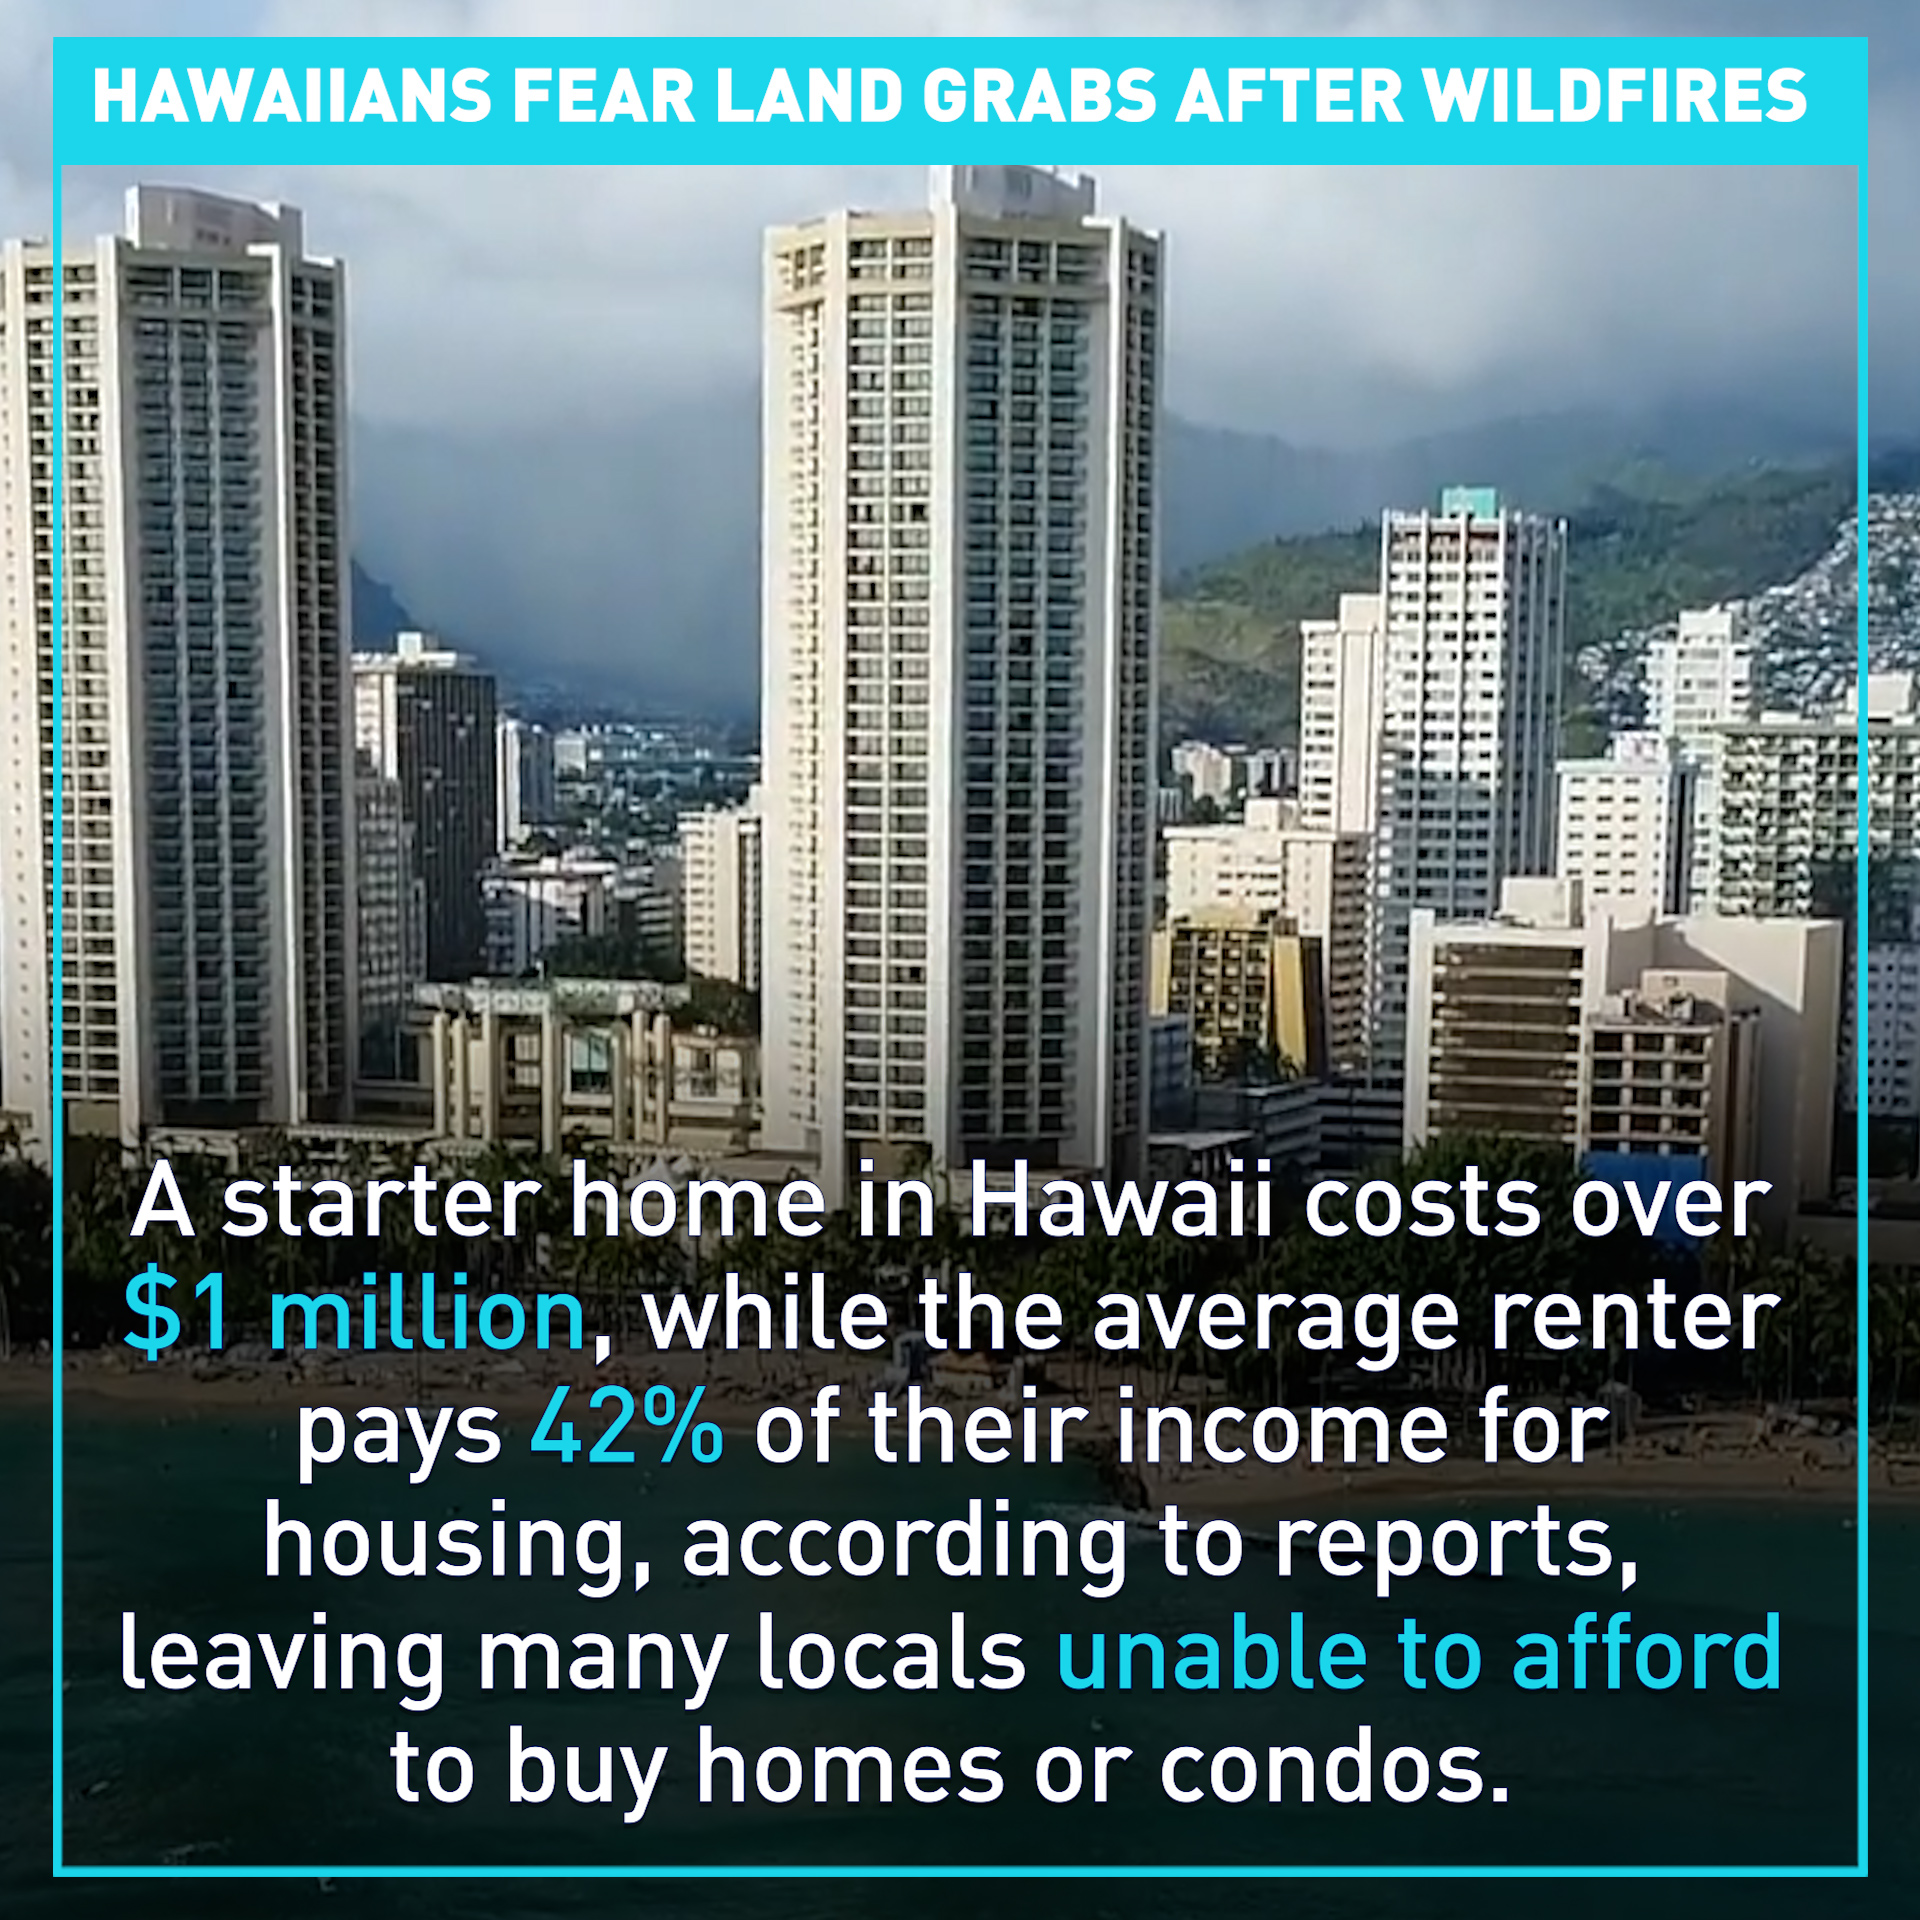 Hawaii's plan to prevent land grabs from wealthy mainlanders